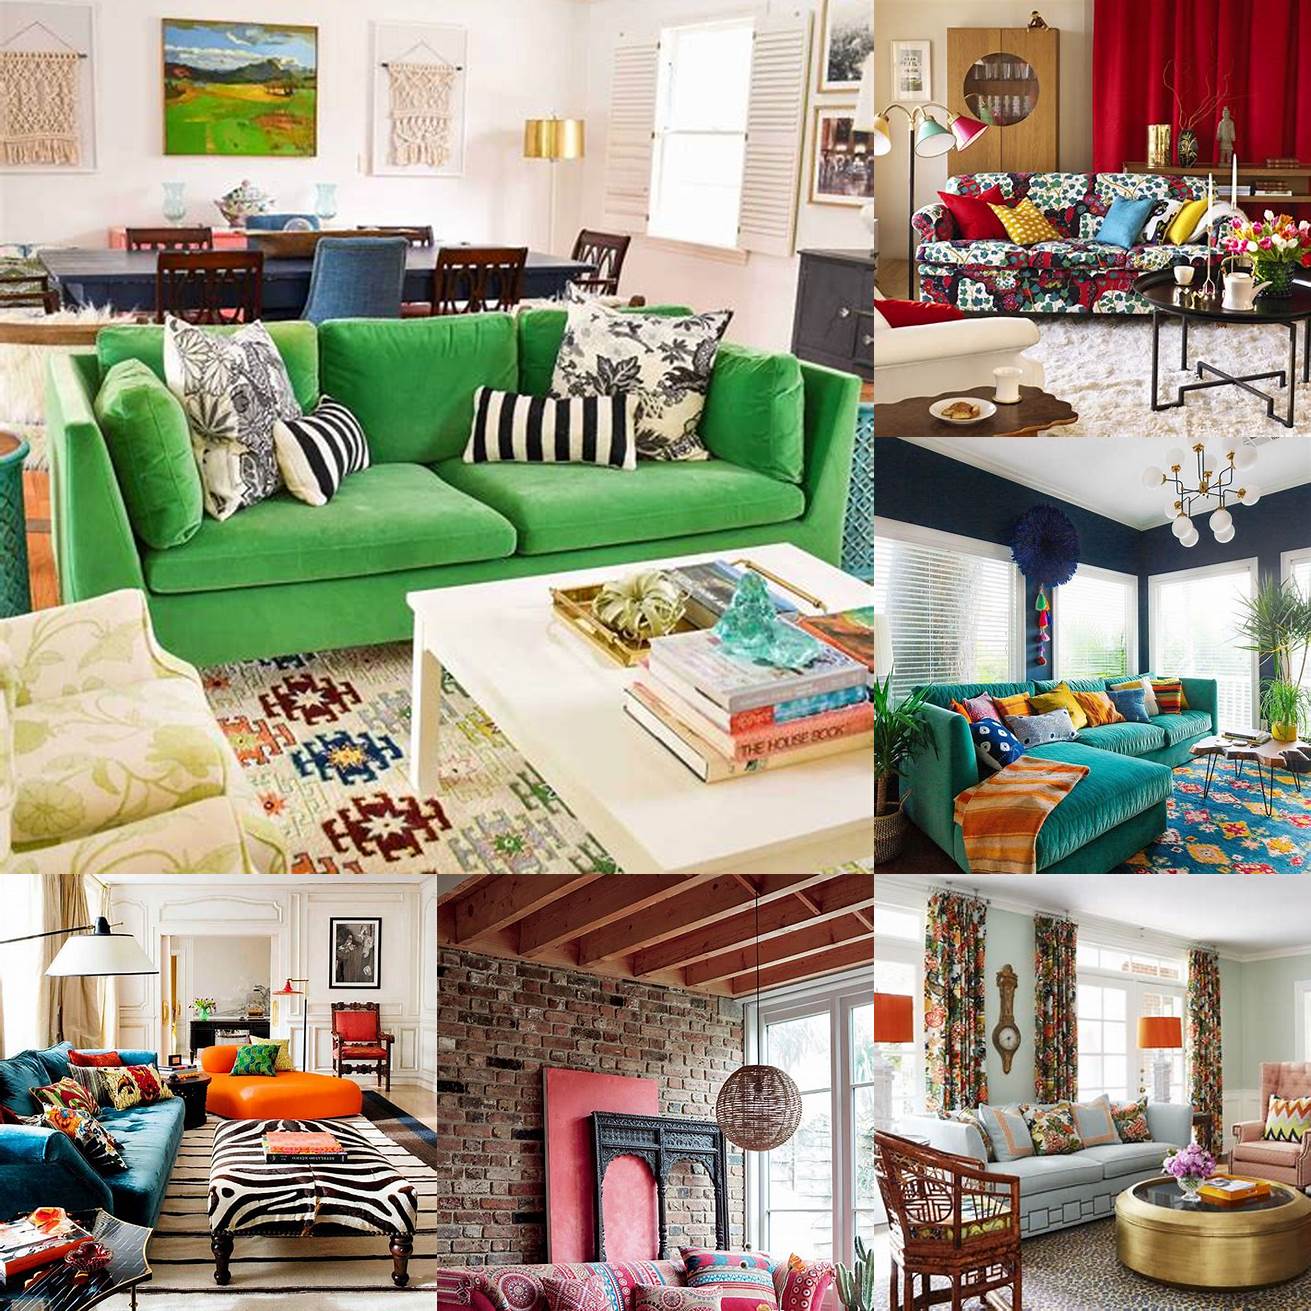 Bold and colorful living room with statement furniture pieces